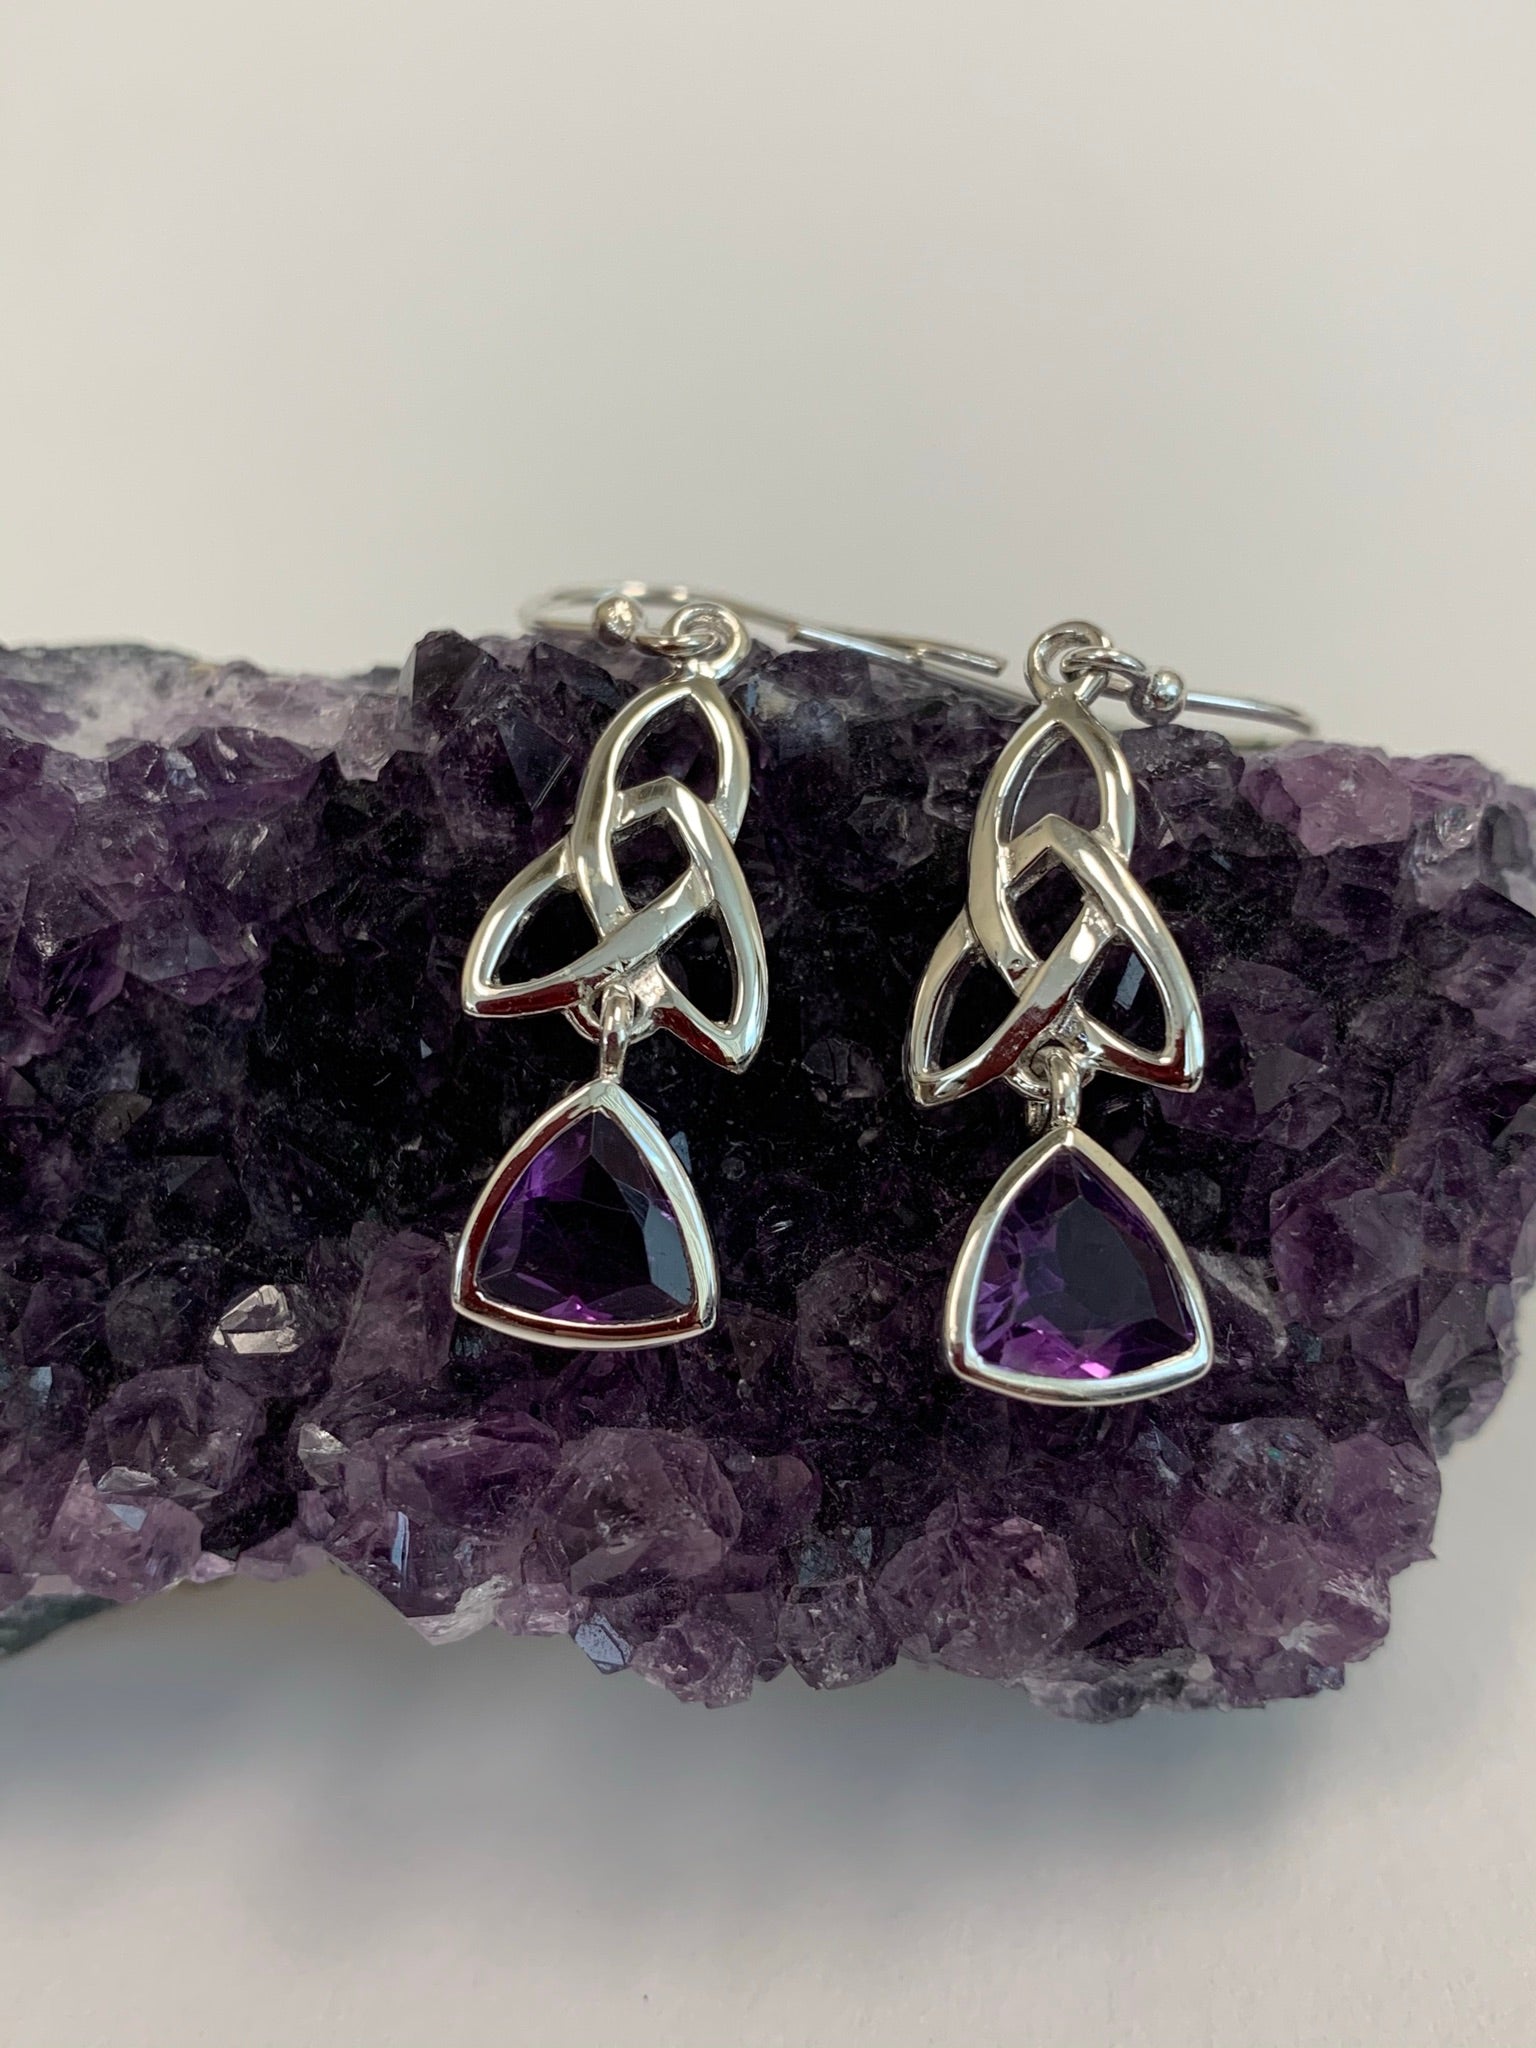 Trilliant cut (triangular) faceted amethyst gemstones outlined in sterling silver, dangle from an elongated Celtic trinity knot, or triquetra. These earrings are lightweight, have wires, not posts and are approximately 1½" long.